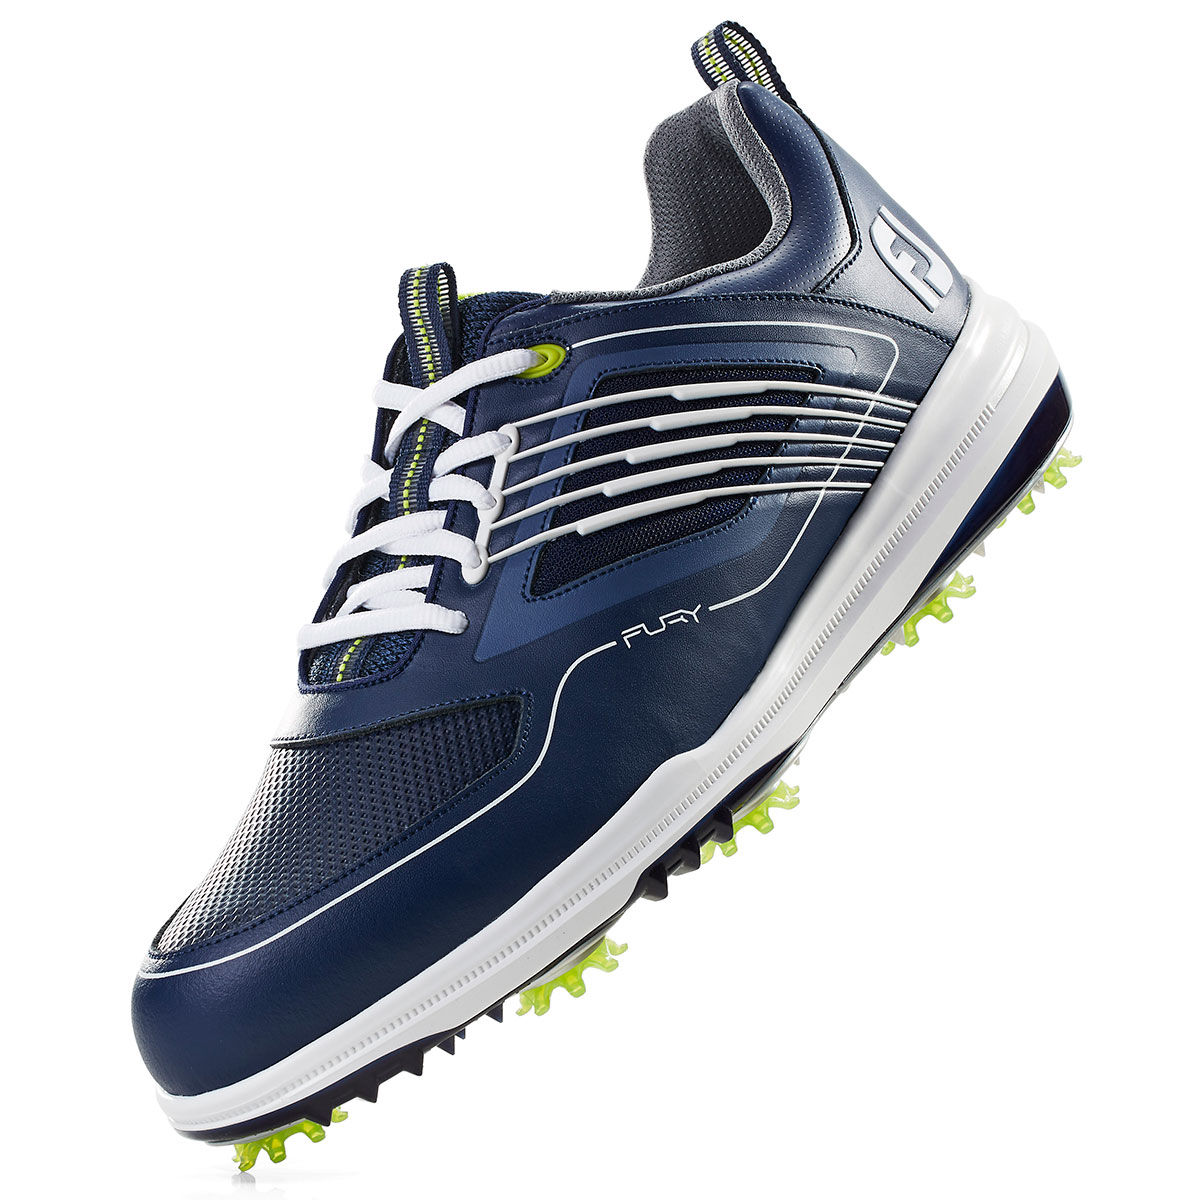 FootJoy Fury Shoes from american golf